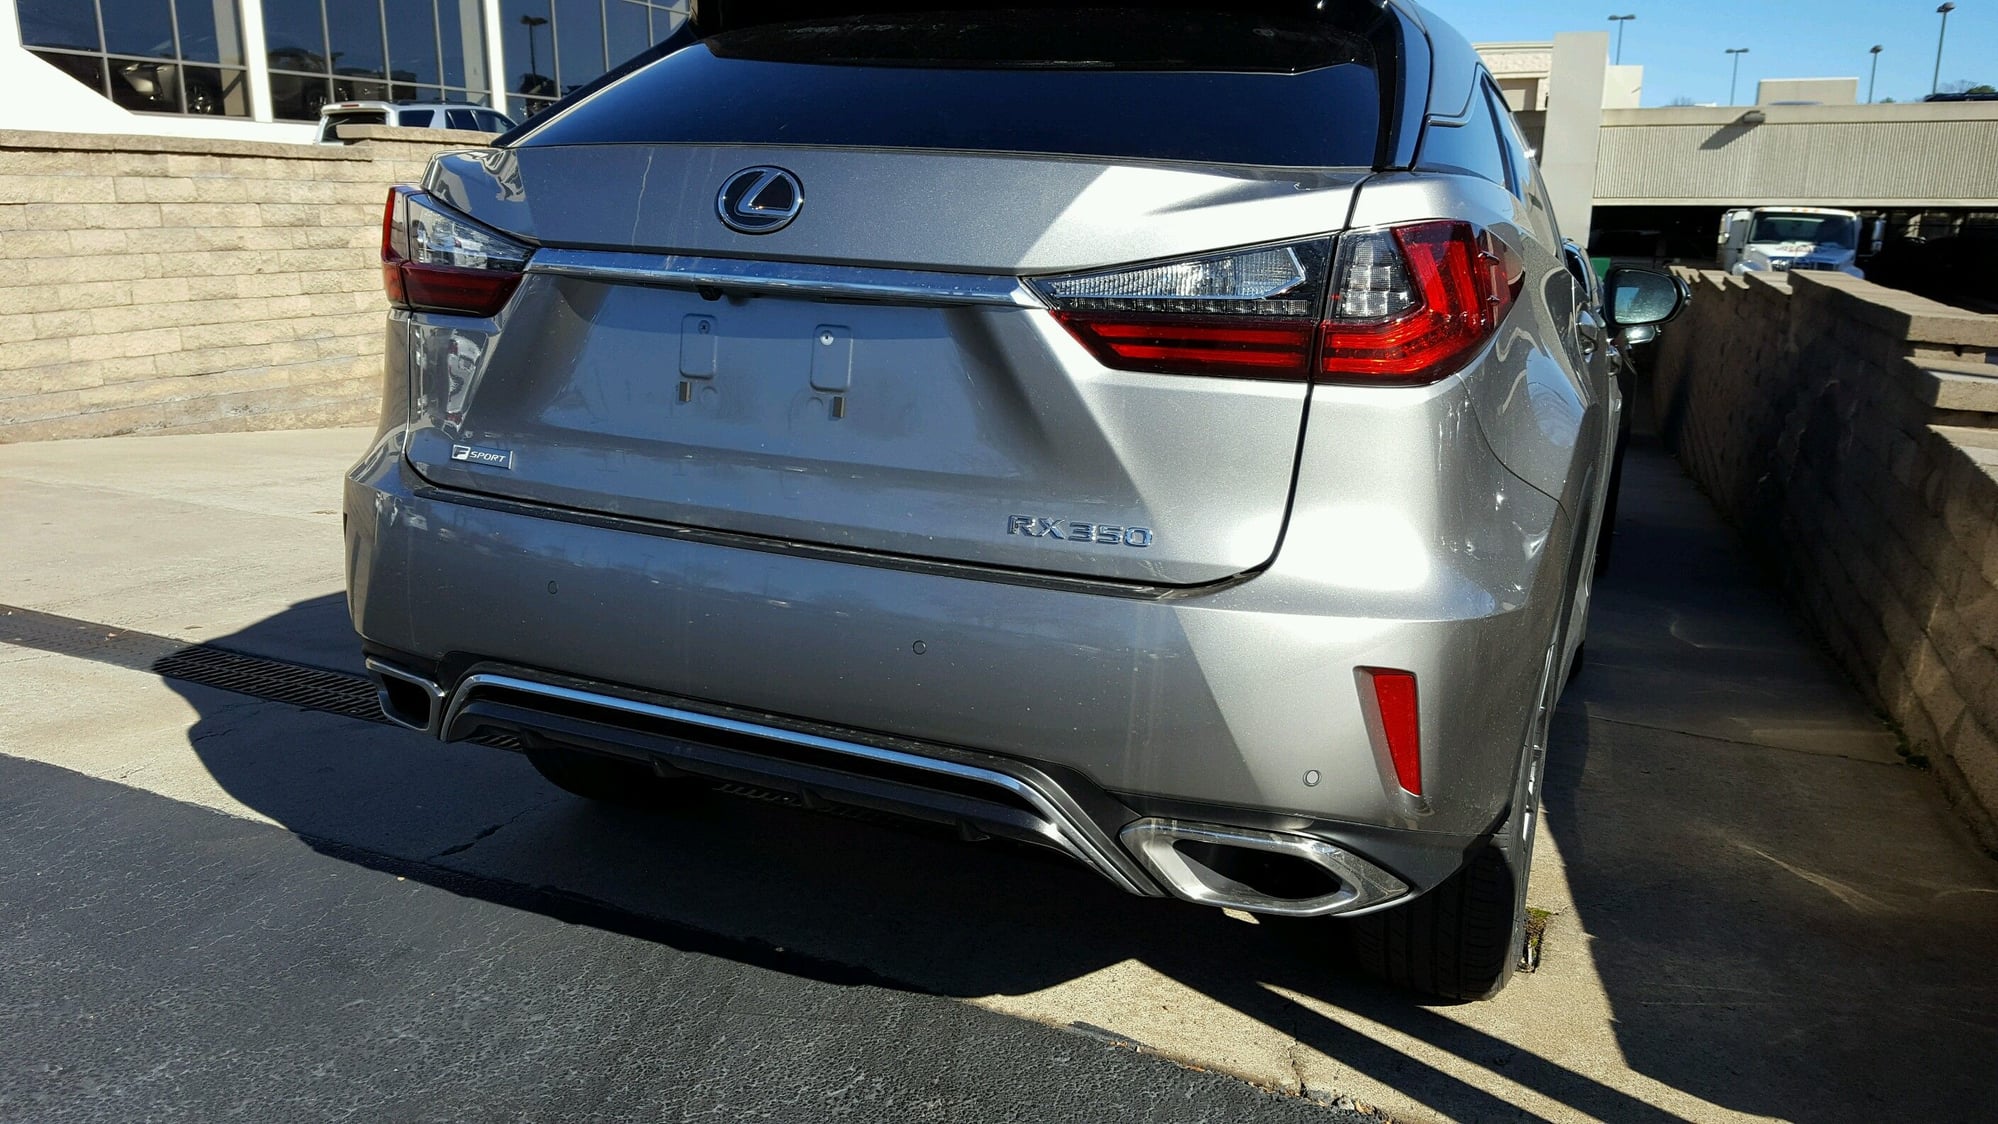 Pics of your 4RX Right NOW! - Page 34 - ClubLexus - Lexus Forum Discussion